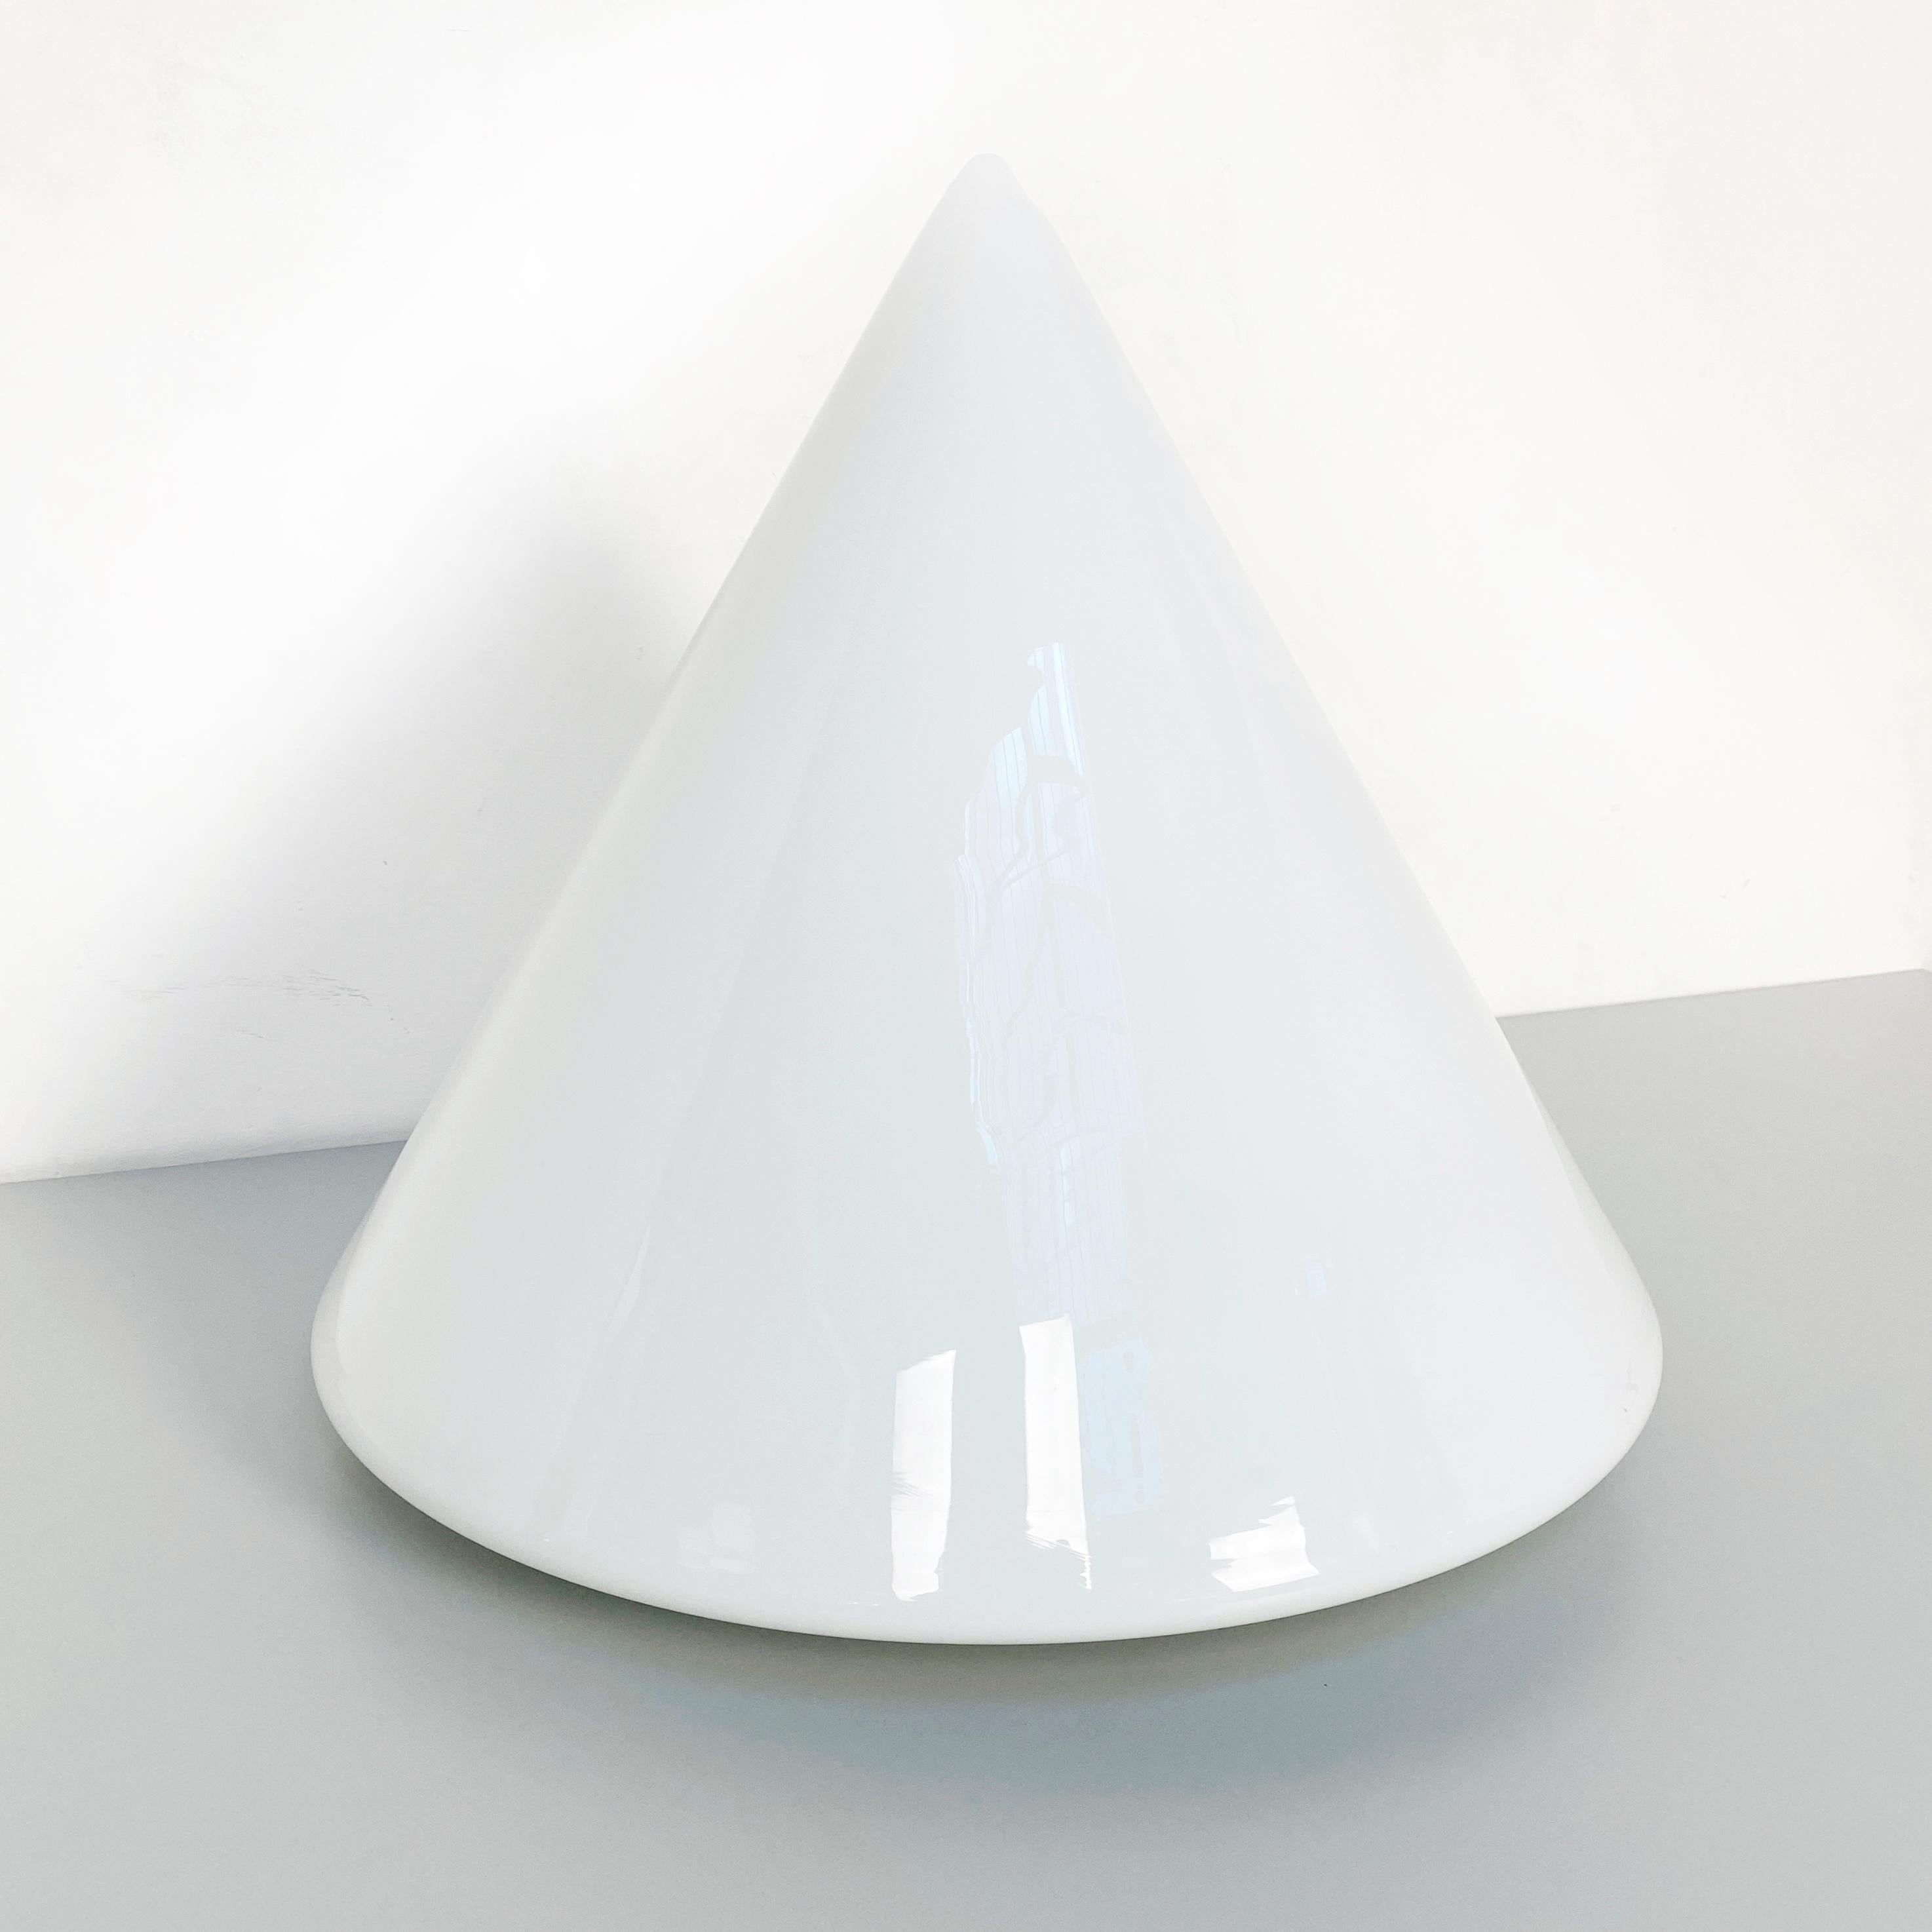 Plastic Italian Mid-Century Modern Conical Table Lamp with Double Opal Glass, 1970s For Sale